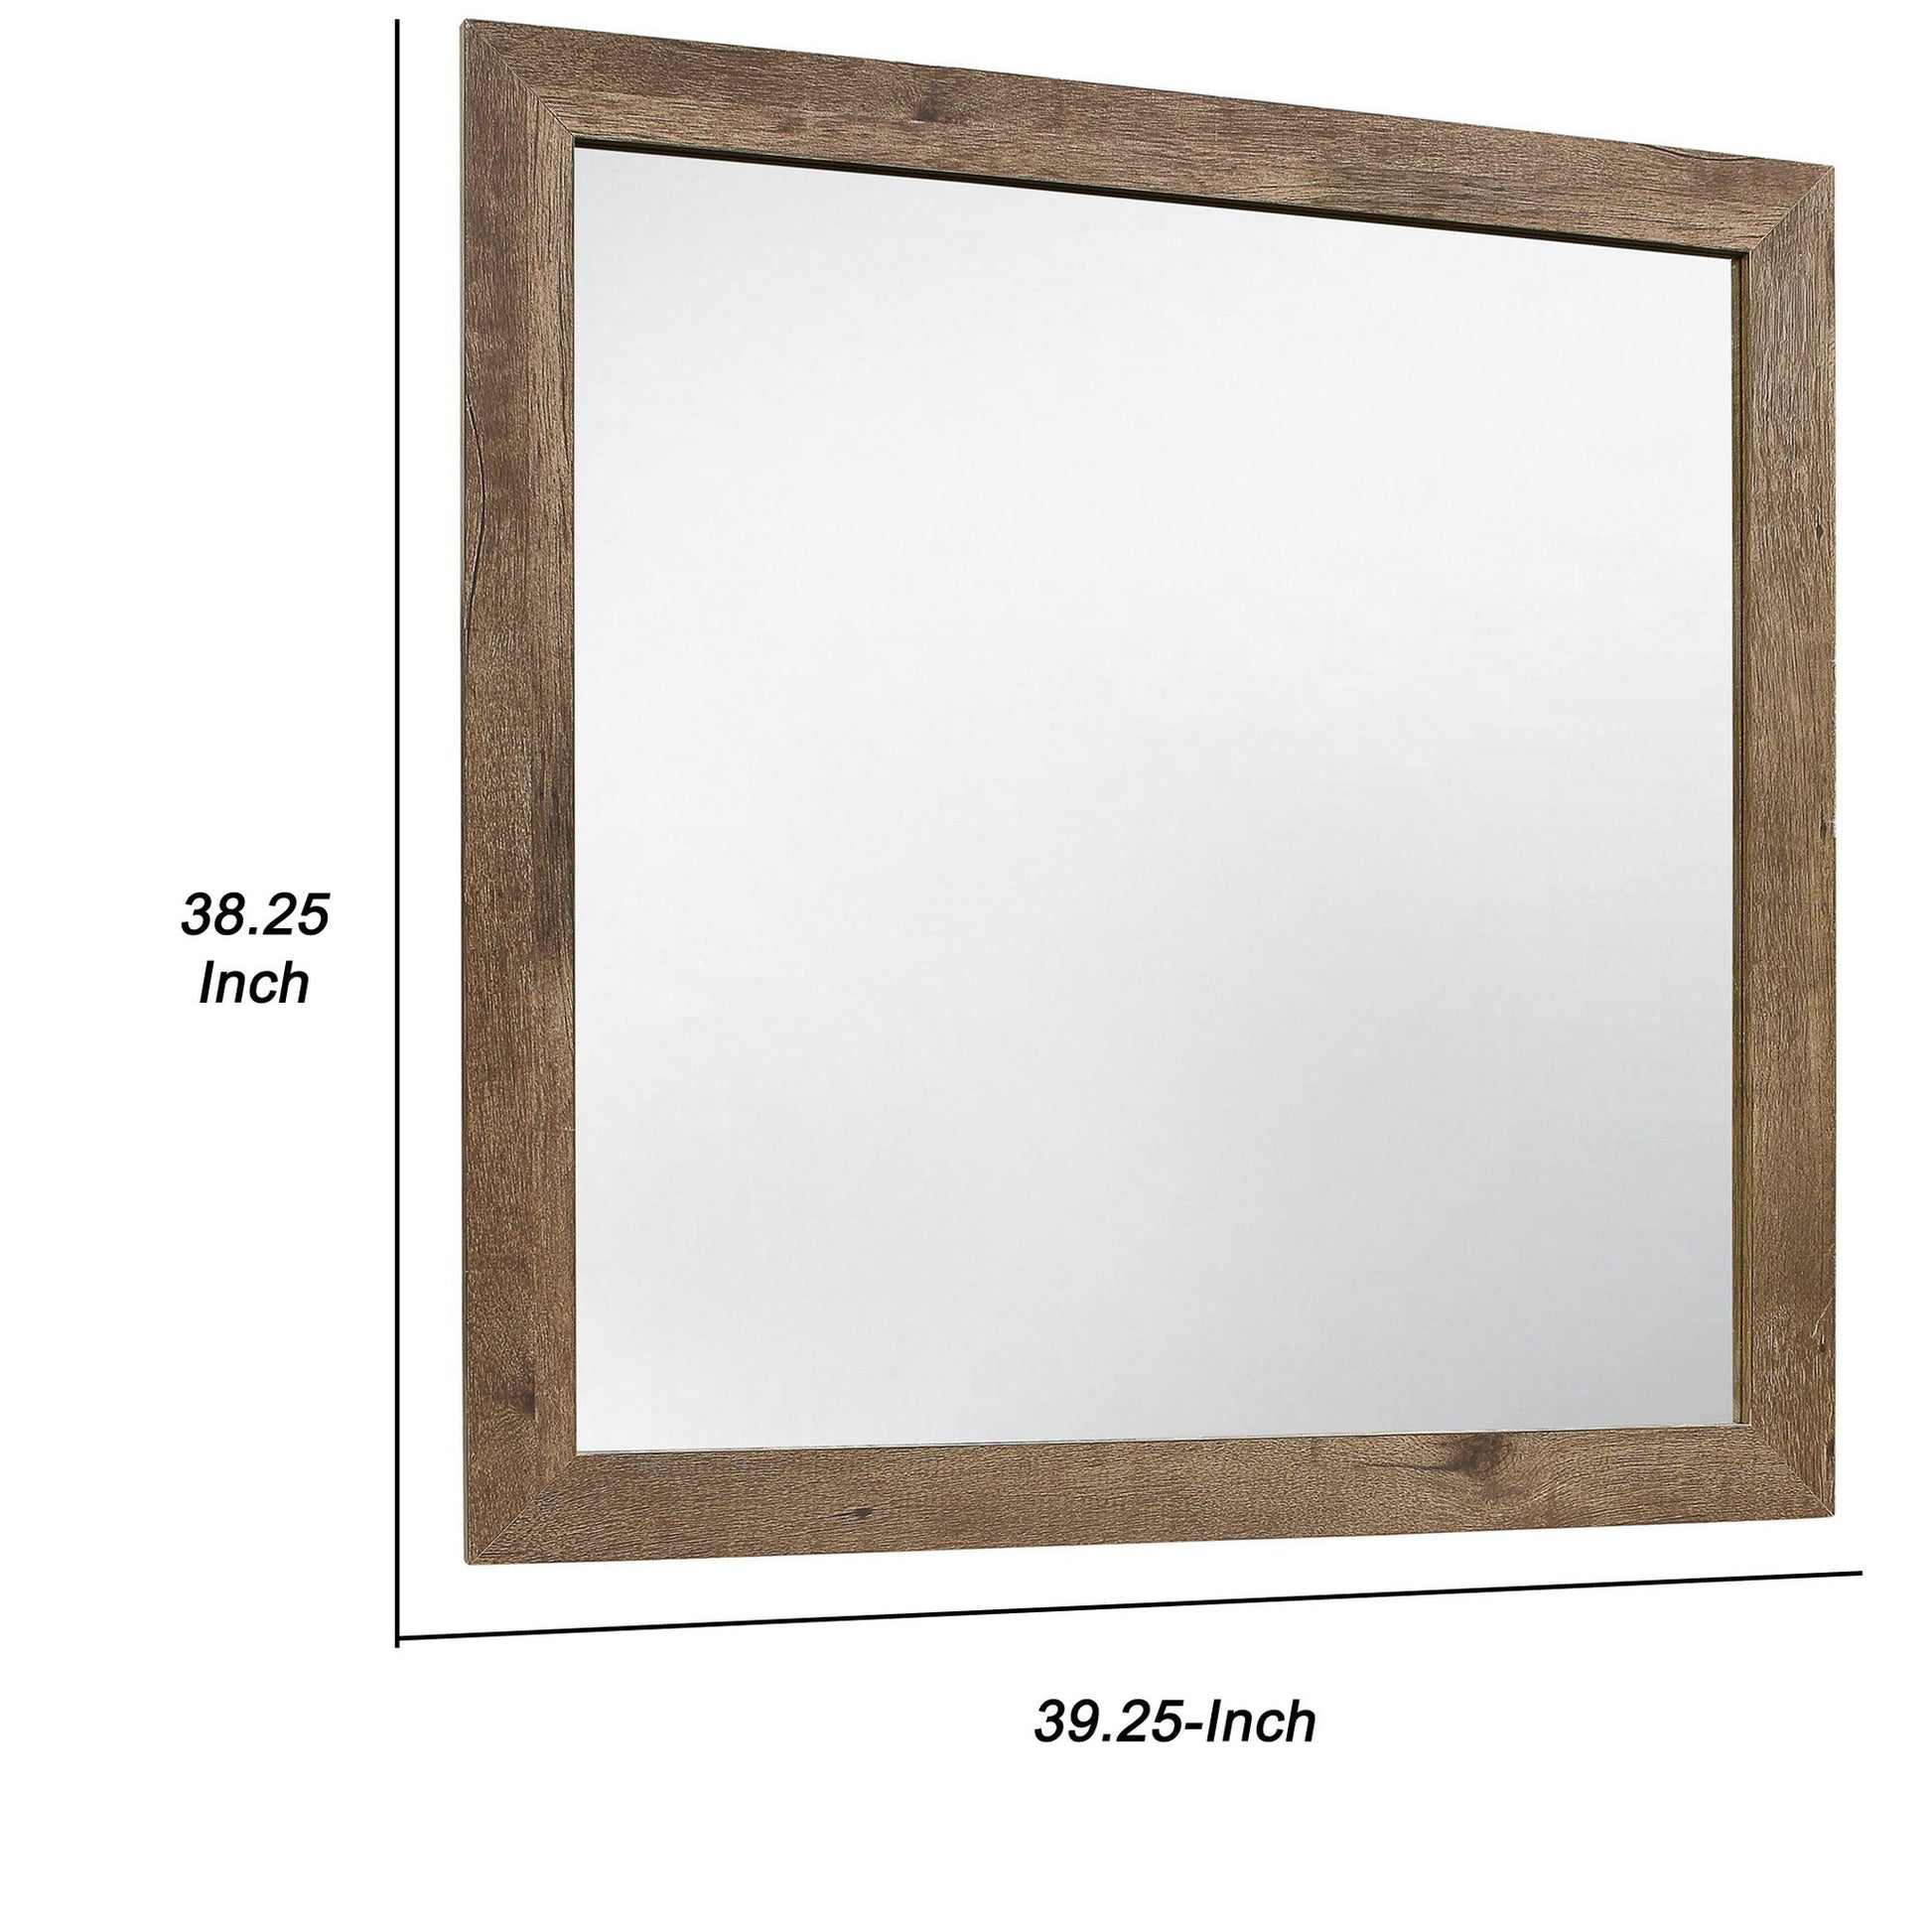 Benzara Brown and Silver Square Wooden Frame Mirror With Rough Hewn Saw Texture